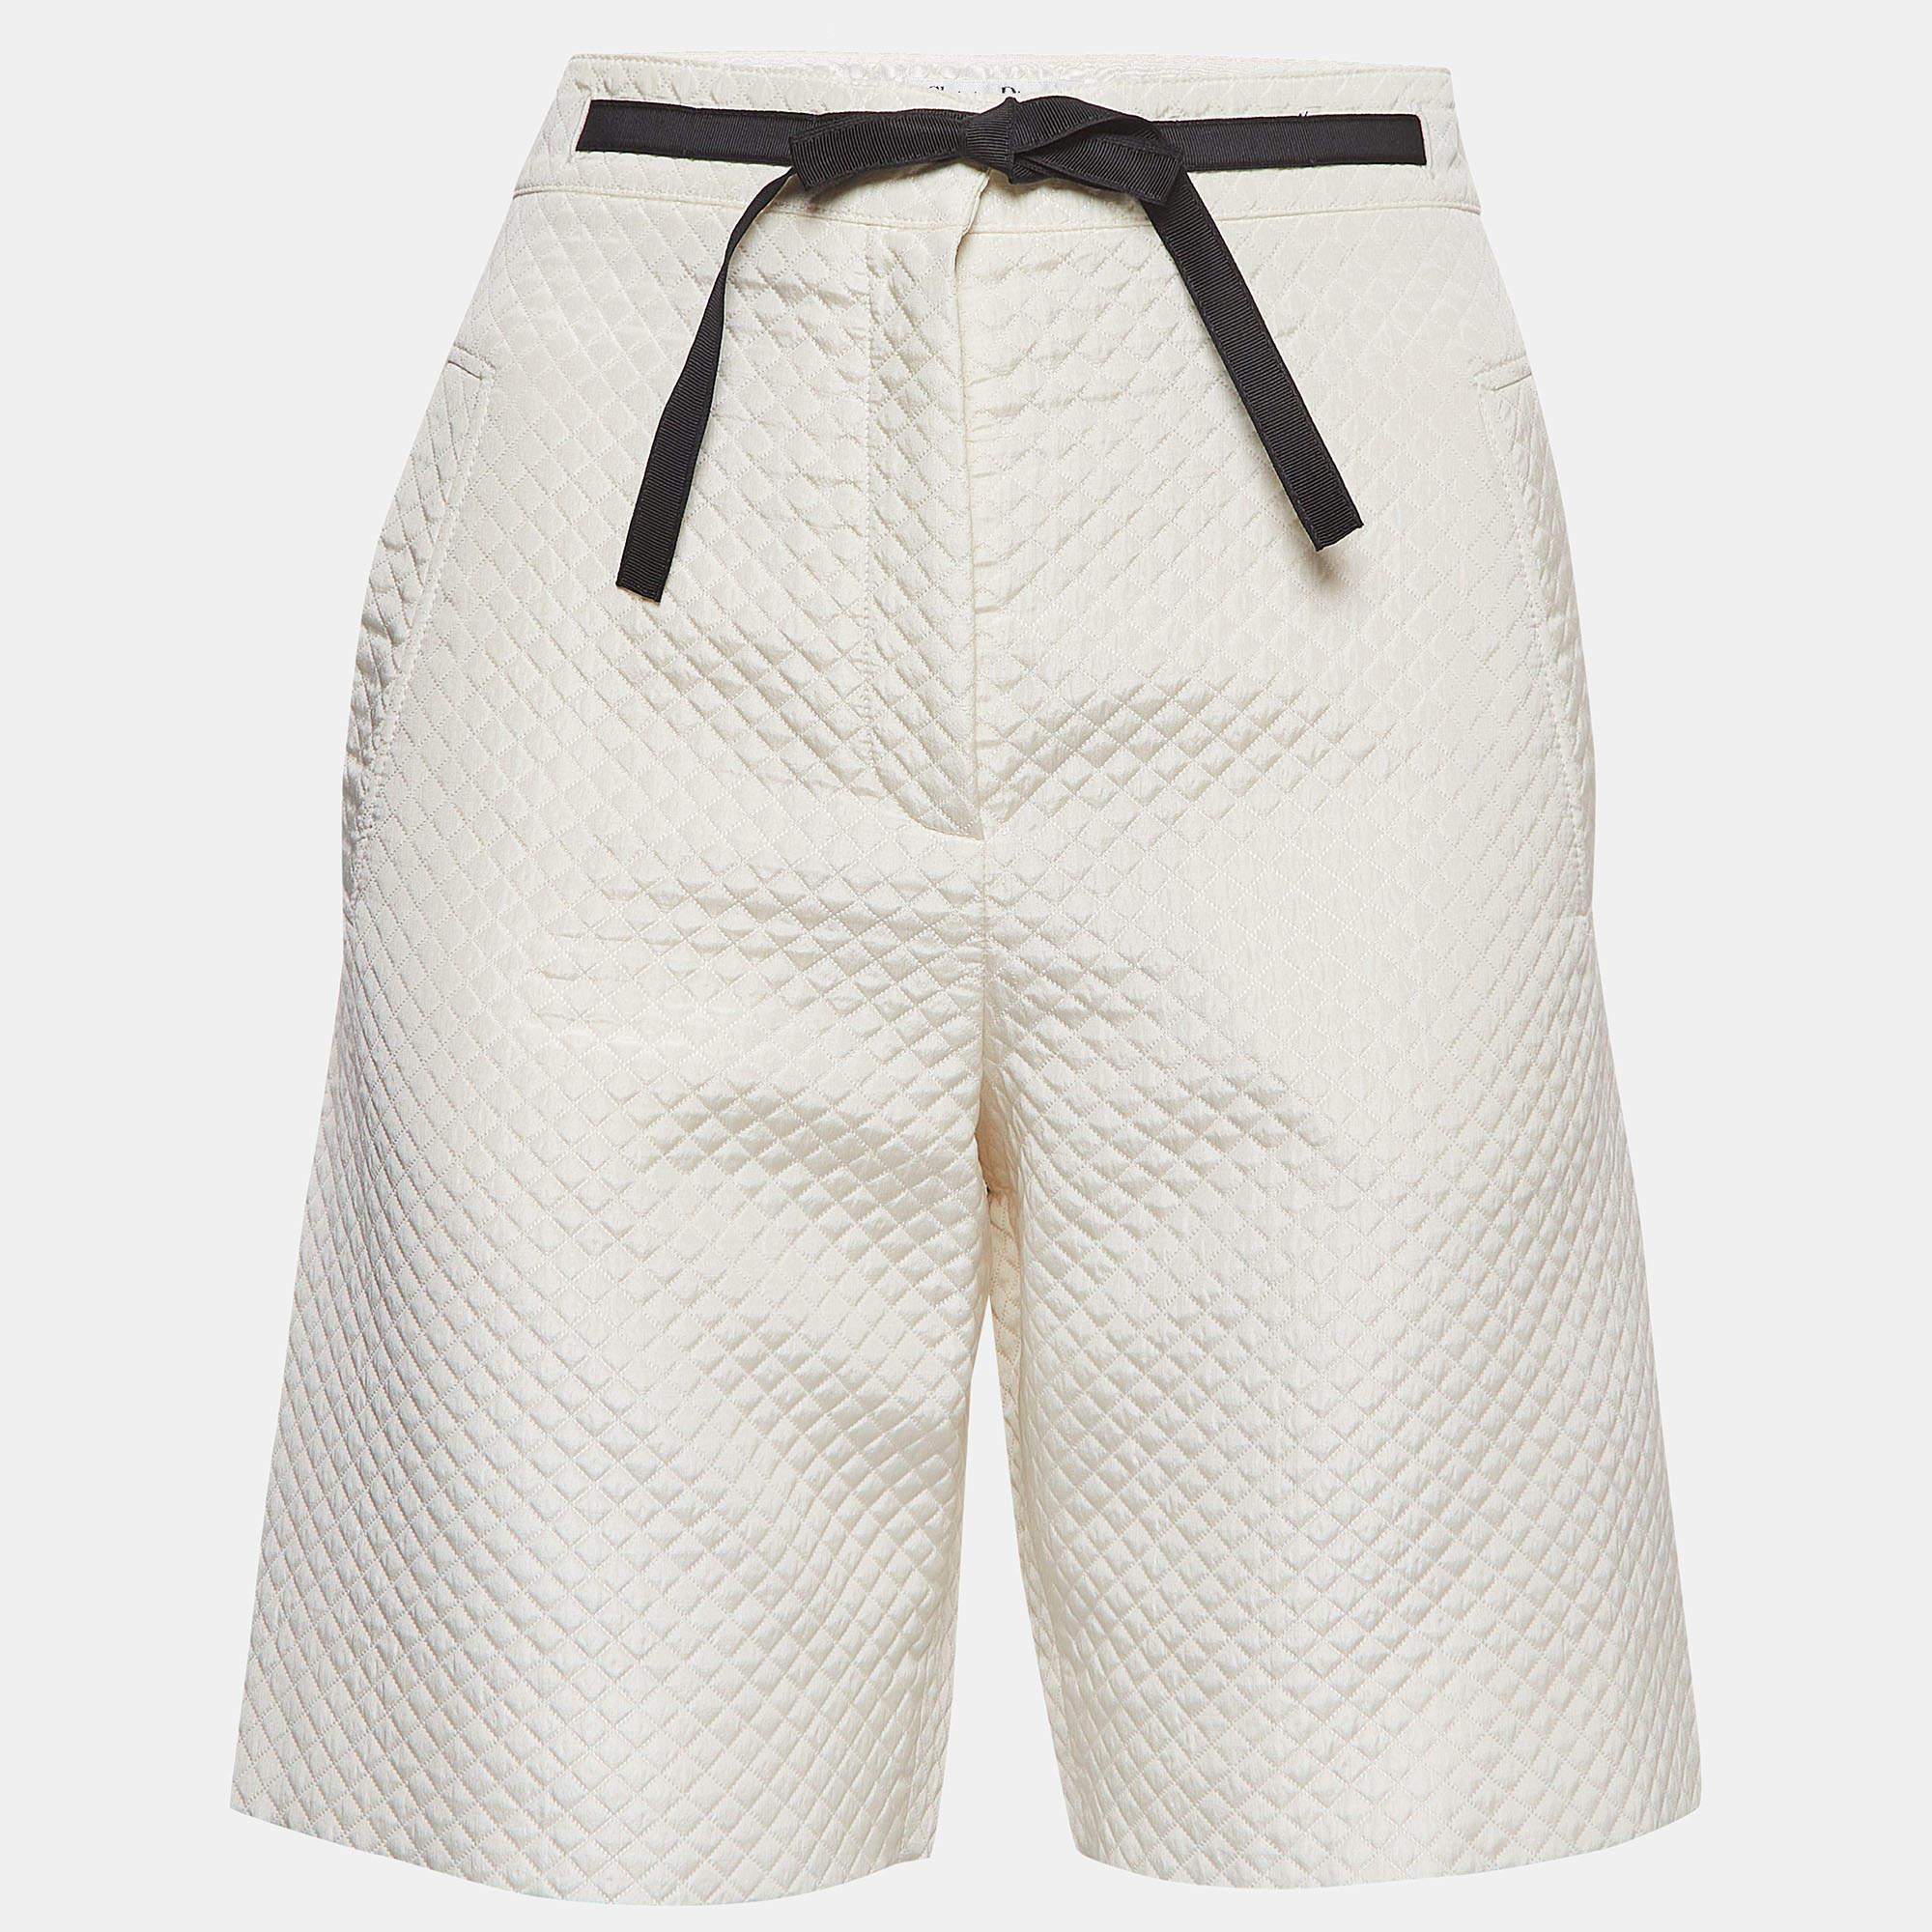 Relaxed days call for a pair of shorts like this. Stitched using high-quality fabric, these designer shorts are styled with classic details and have a superb length. Wear them with T-shirts.

